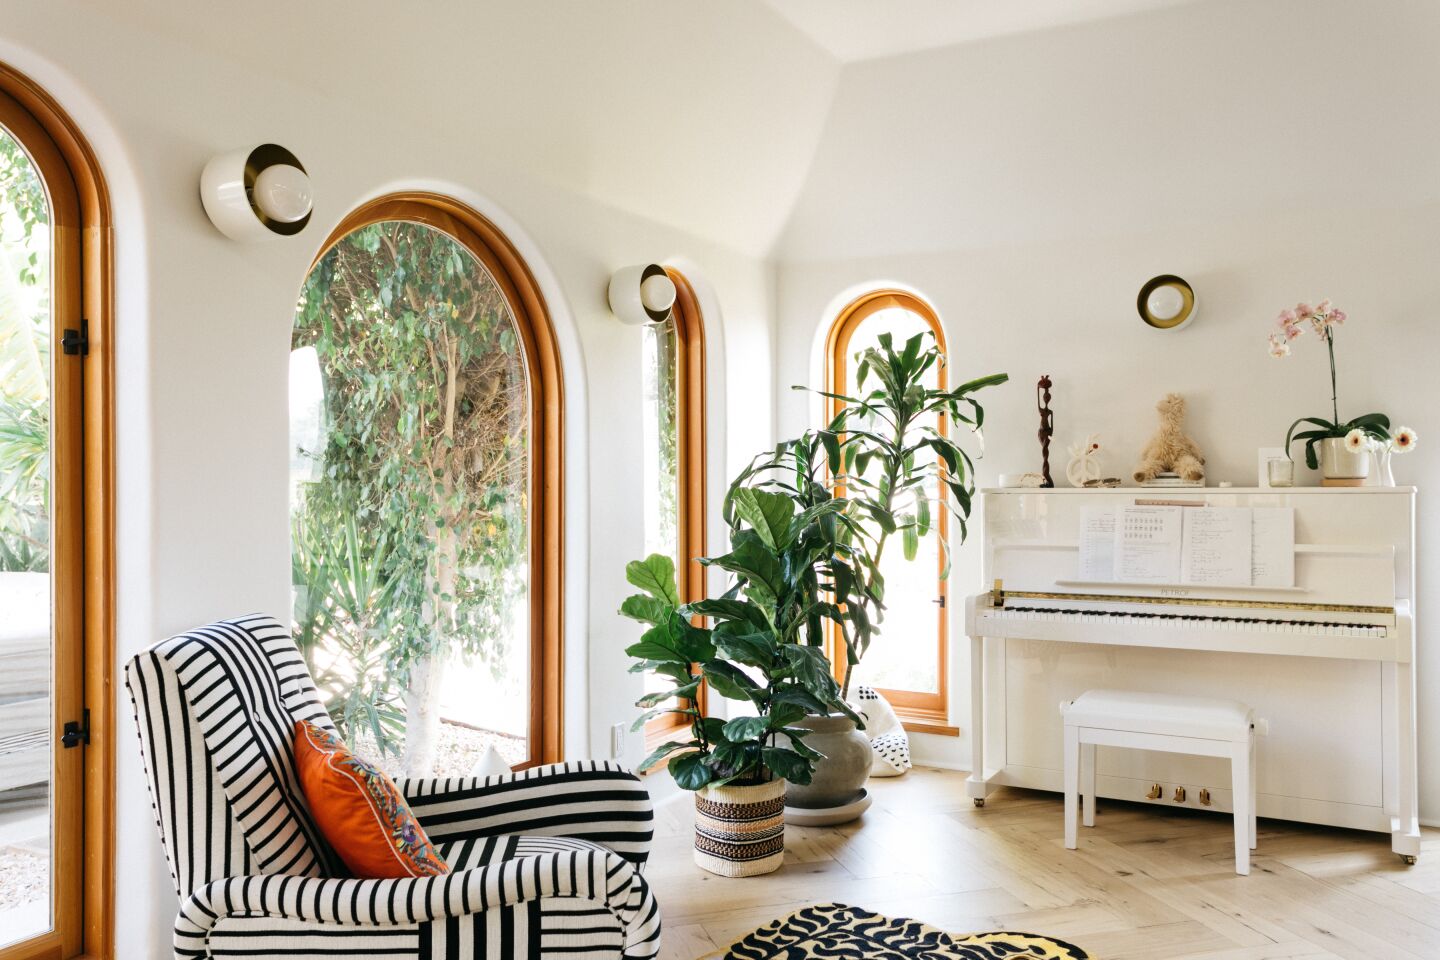 Arched windows in the living room.